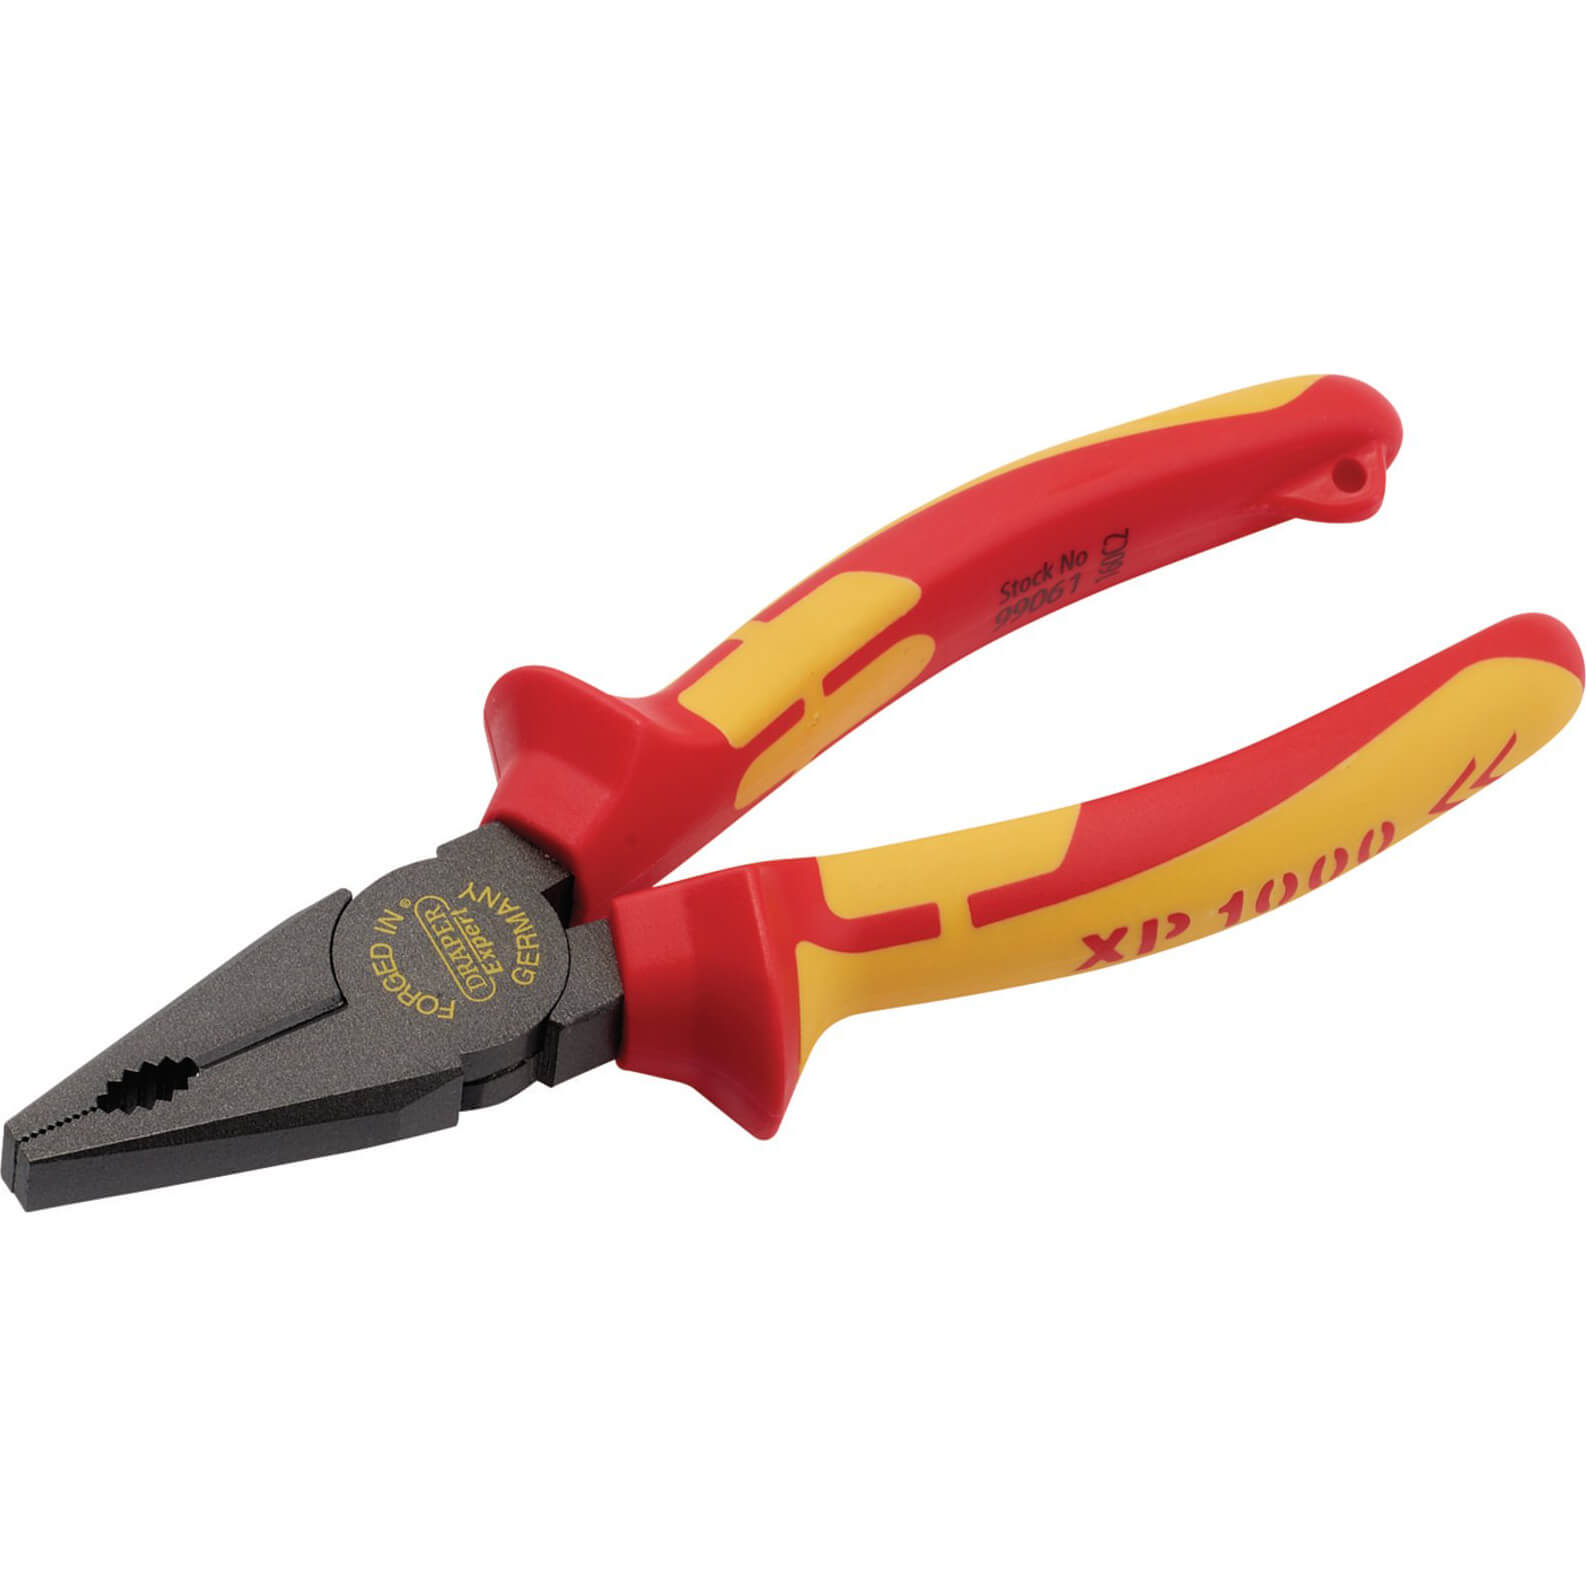 Image of Draper XP1000 VDE Insulated Tethered Combination Pliers 160mm